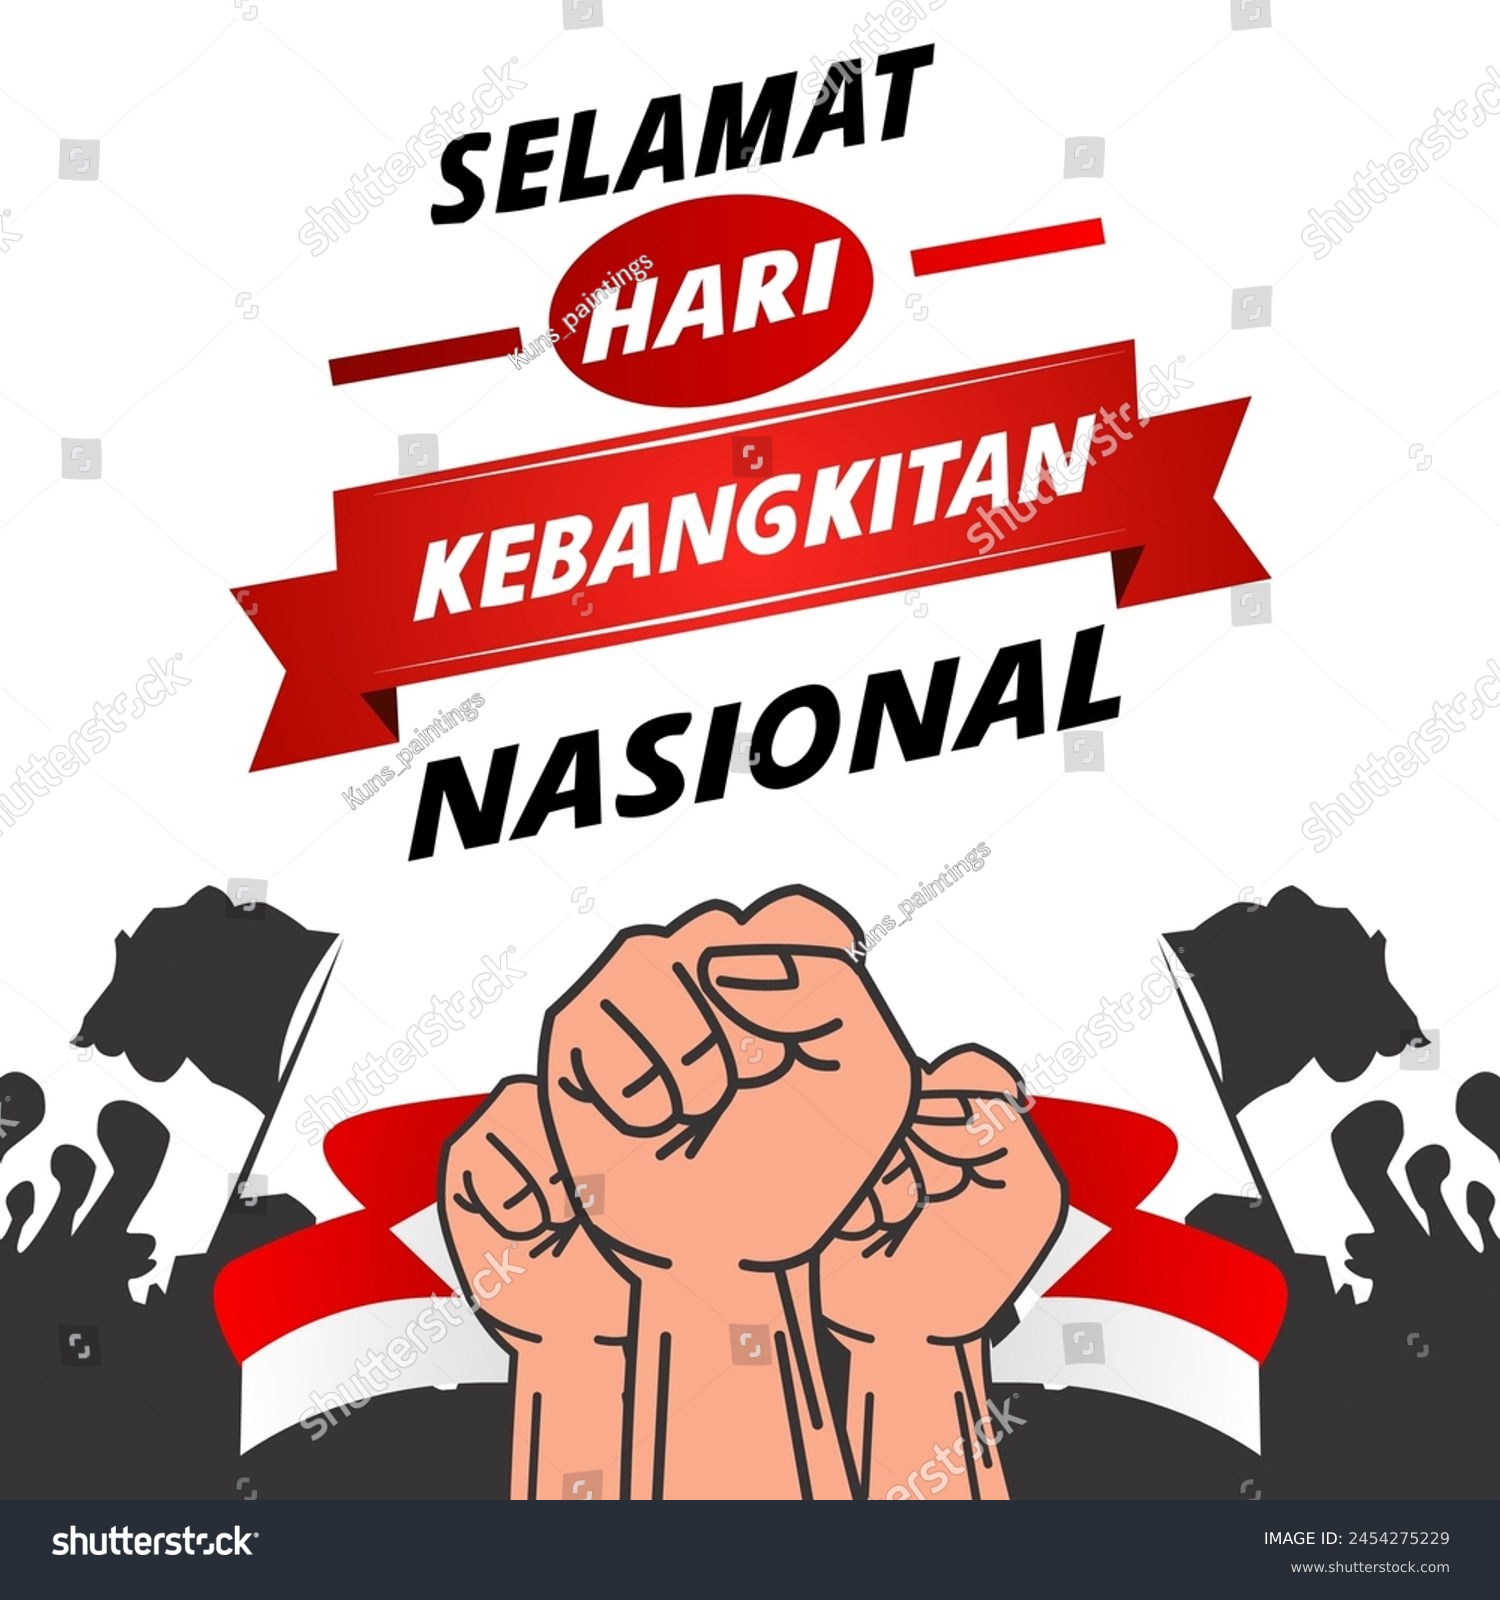 SVG of commemoration of Indonesia's historic day with the words 